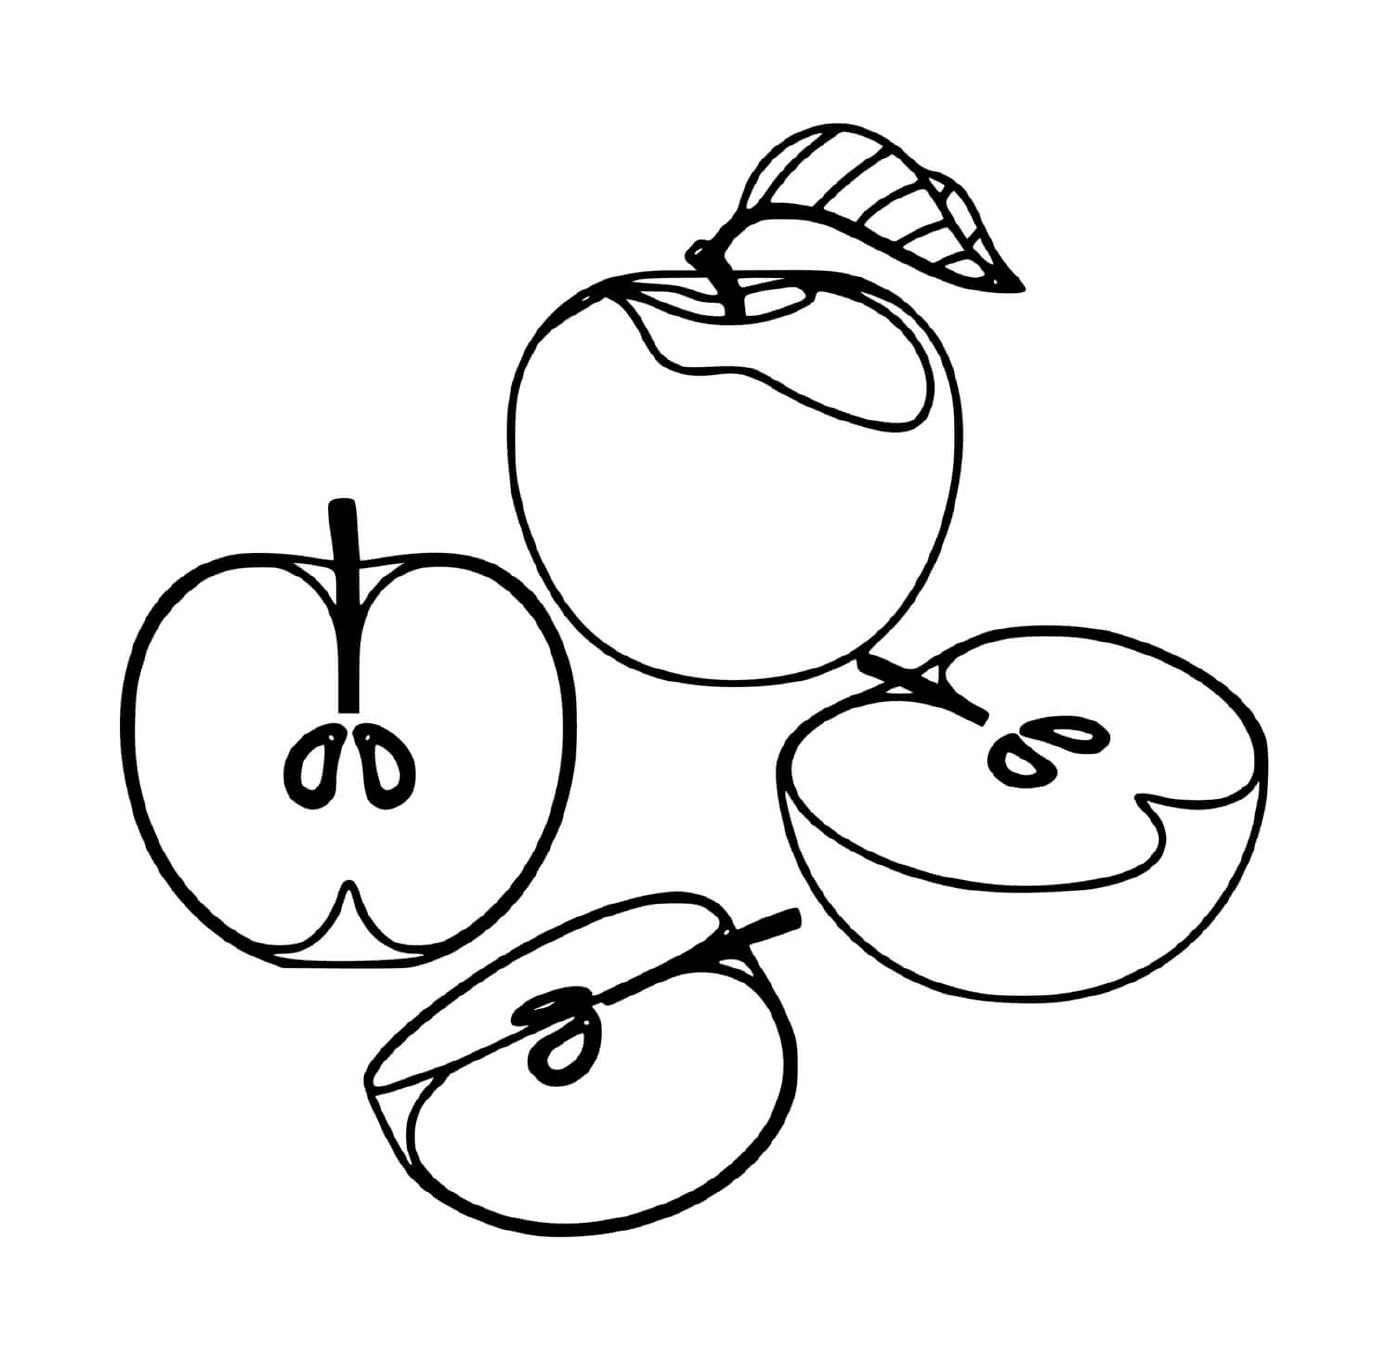 coloriage pomme rouge delicieuse